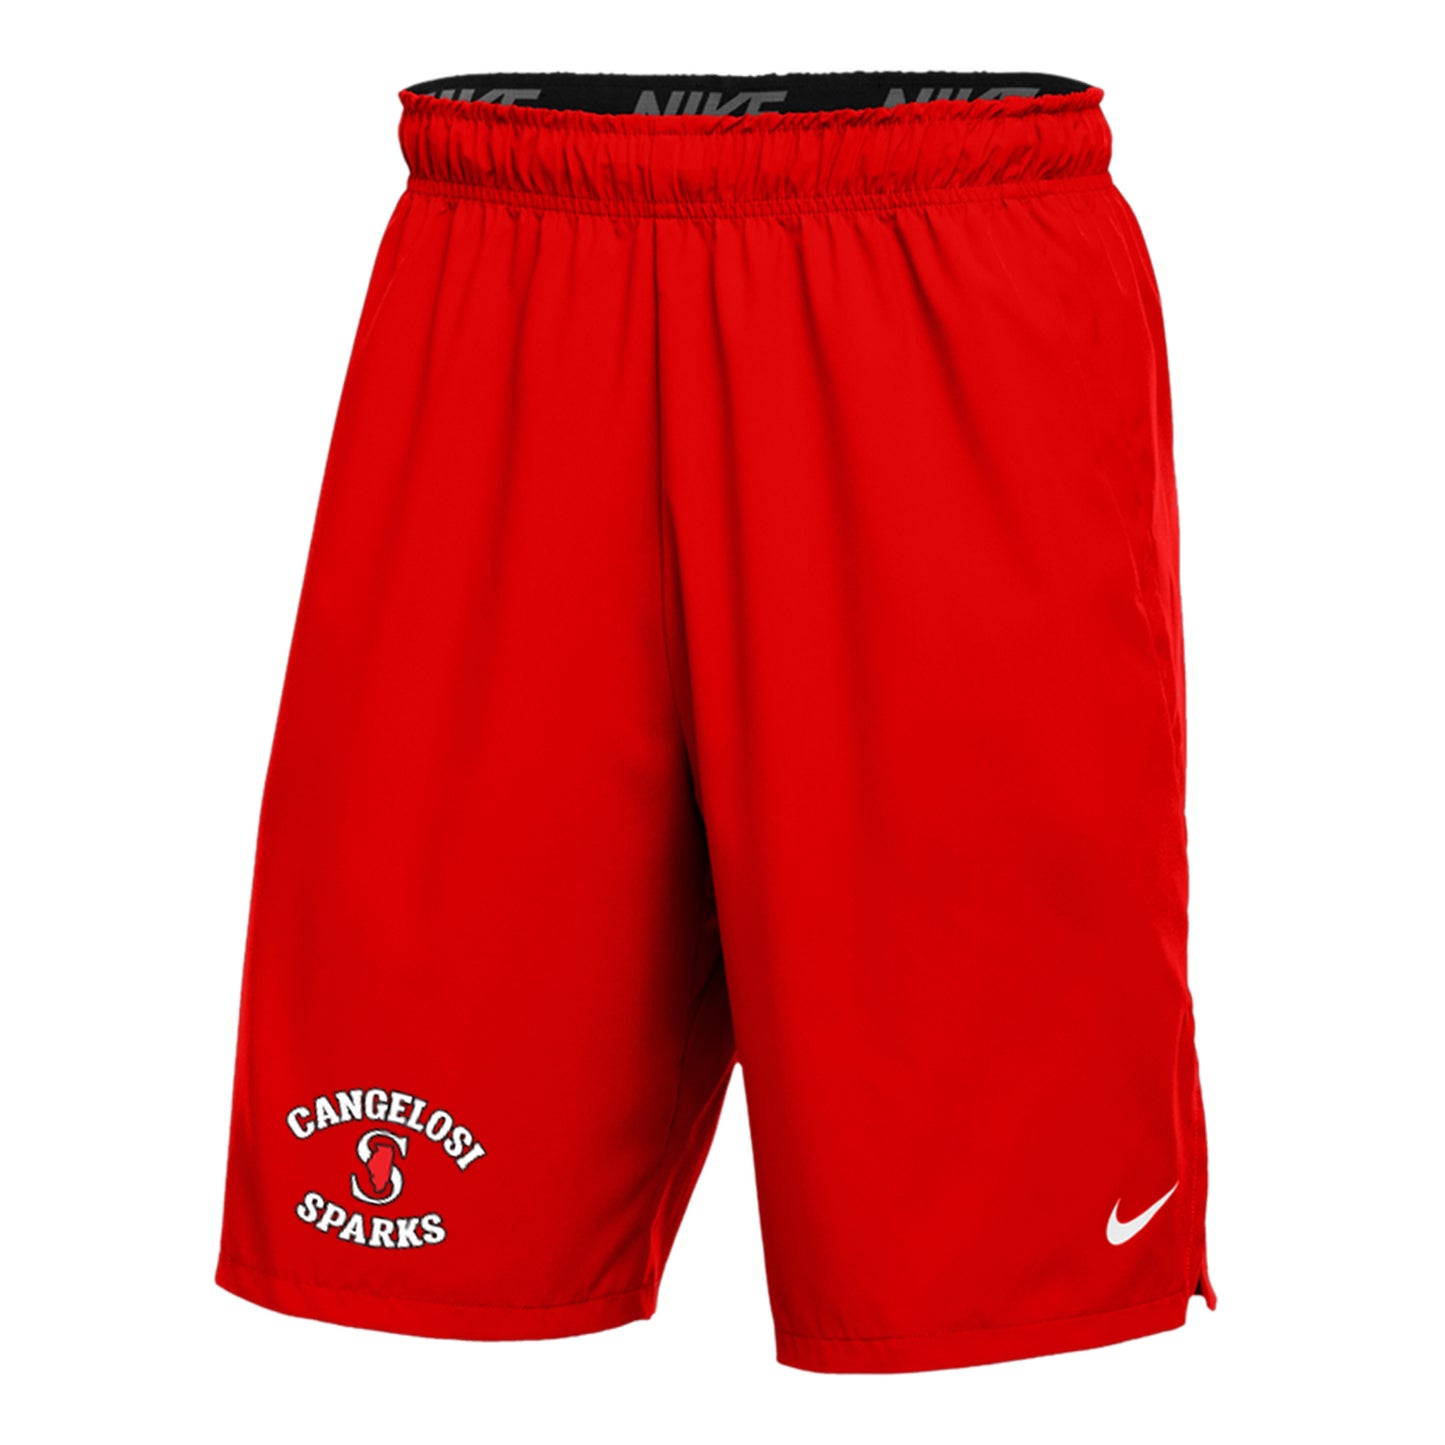 MENS NIKE SPARKS FLY SHORTS RED